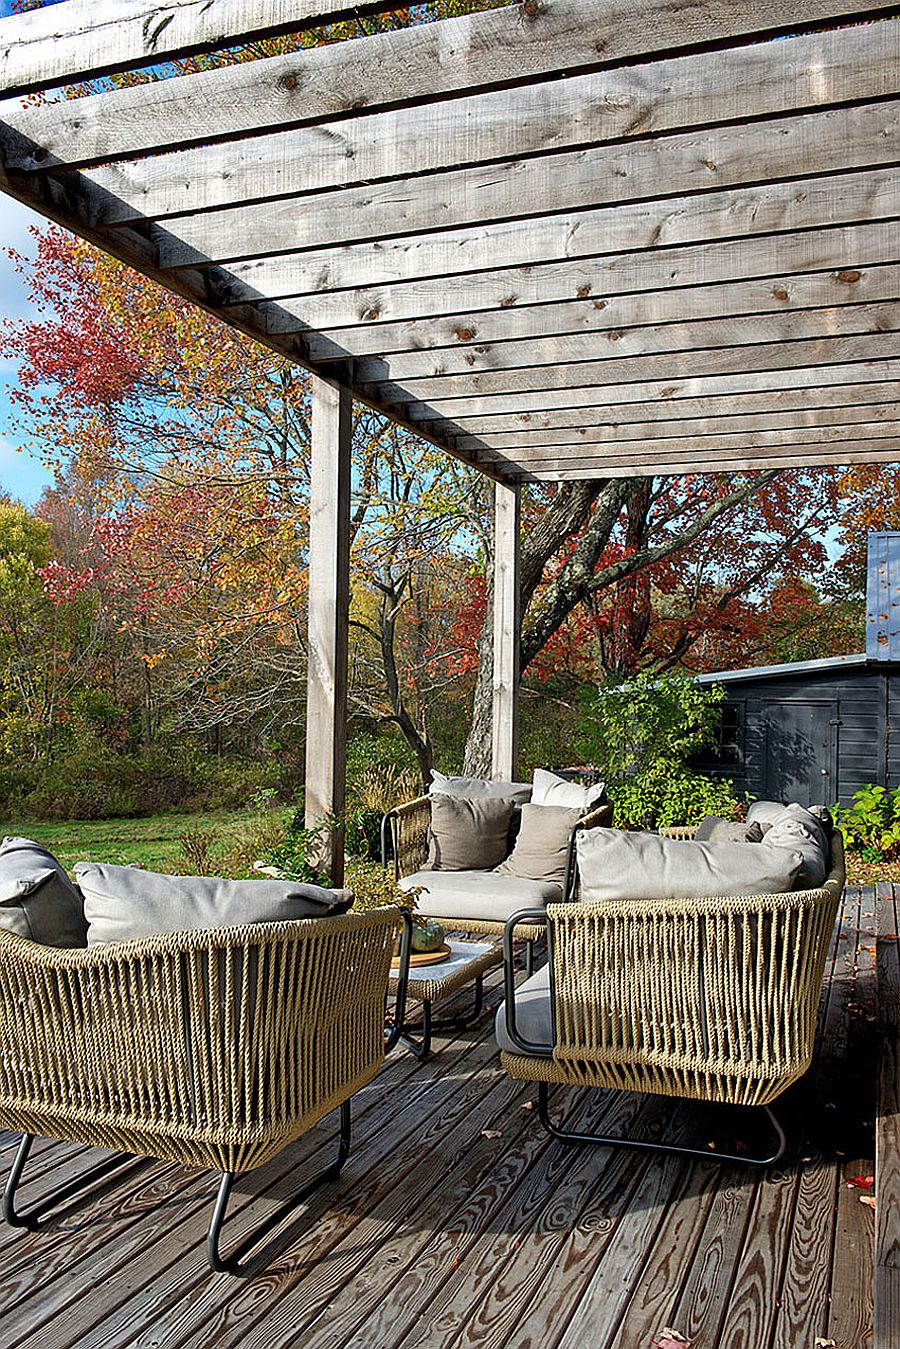 Wooden beams offer shade and give the deck space a sense of uniqueness